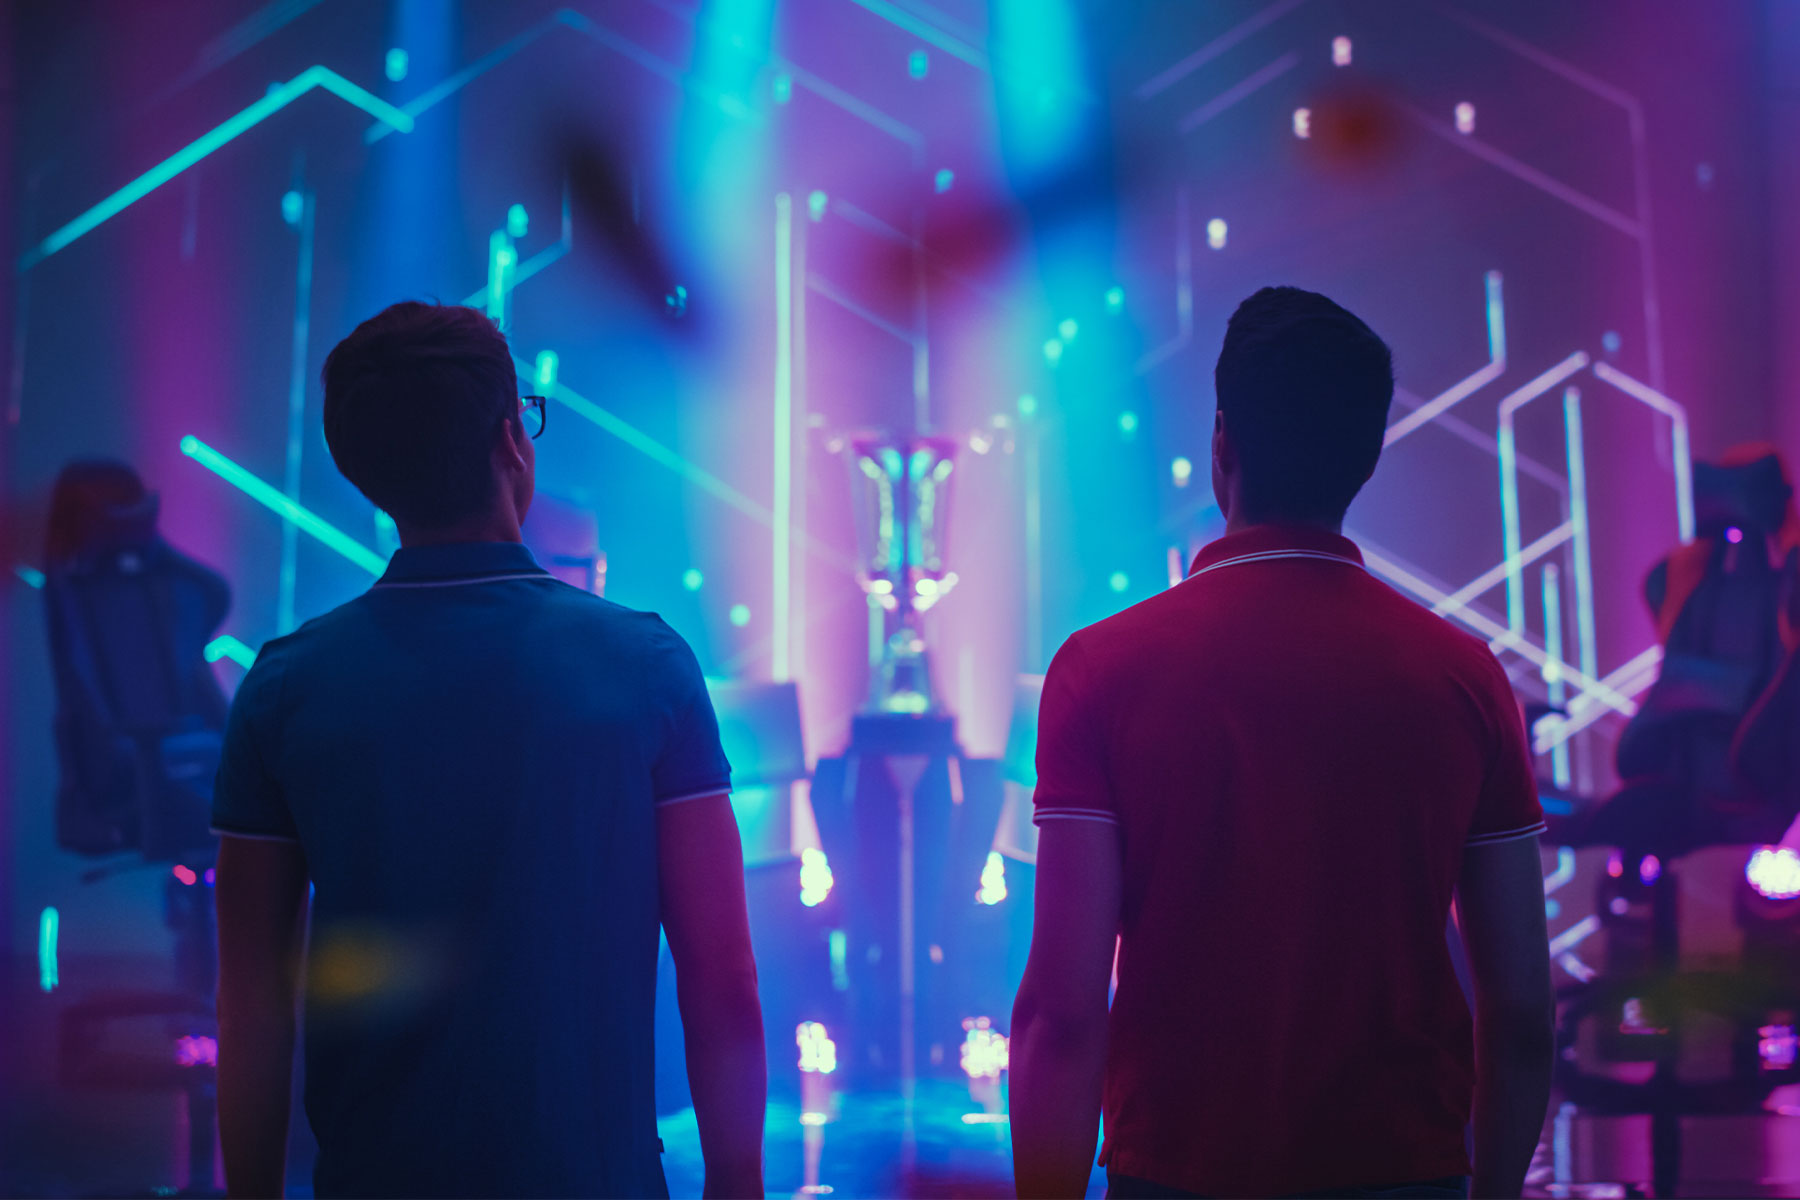 Two Professional eSports Gamers walking on Stage to Participate in the Cyber Games Championship Event.